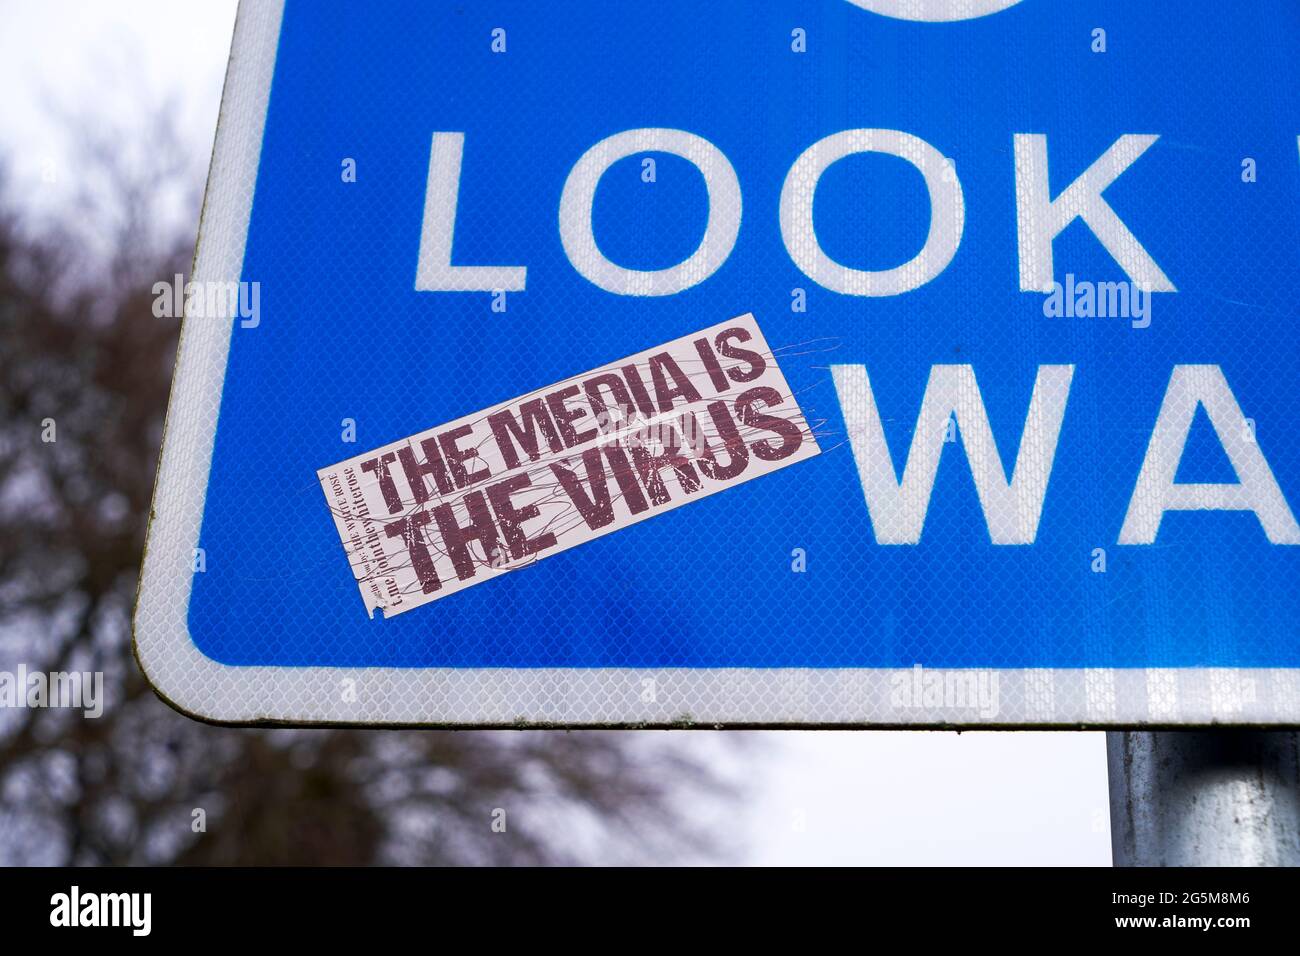 Sticker on a reflective information sign stating that the media is the virus during the Covid-19 Coronavirus pandemic published by The White Rose organisation Stock Photo